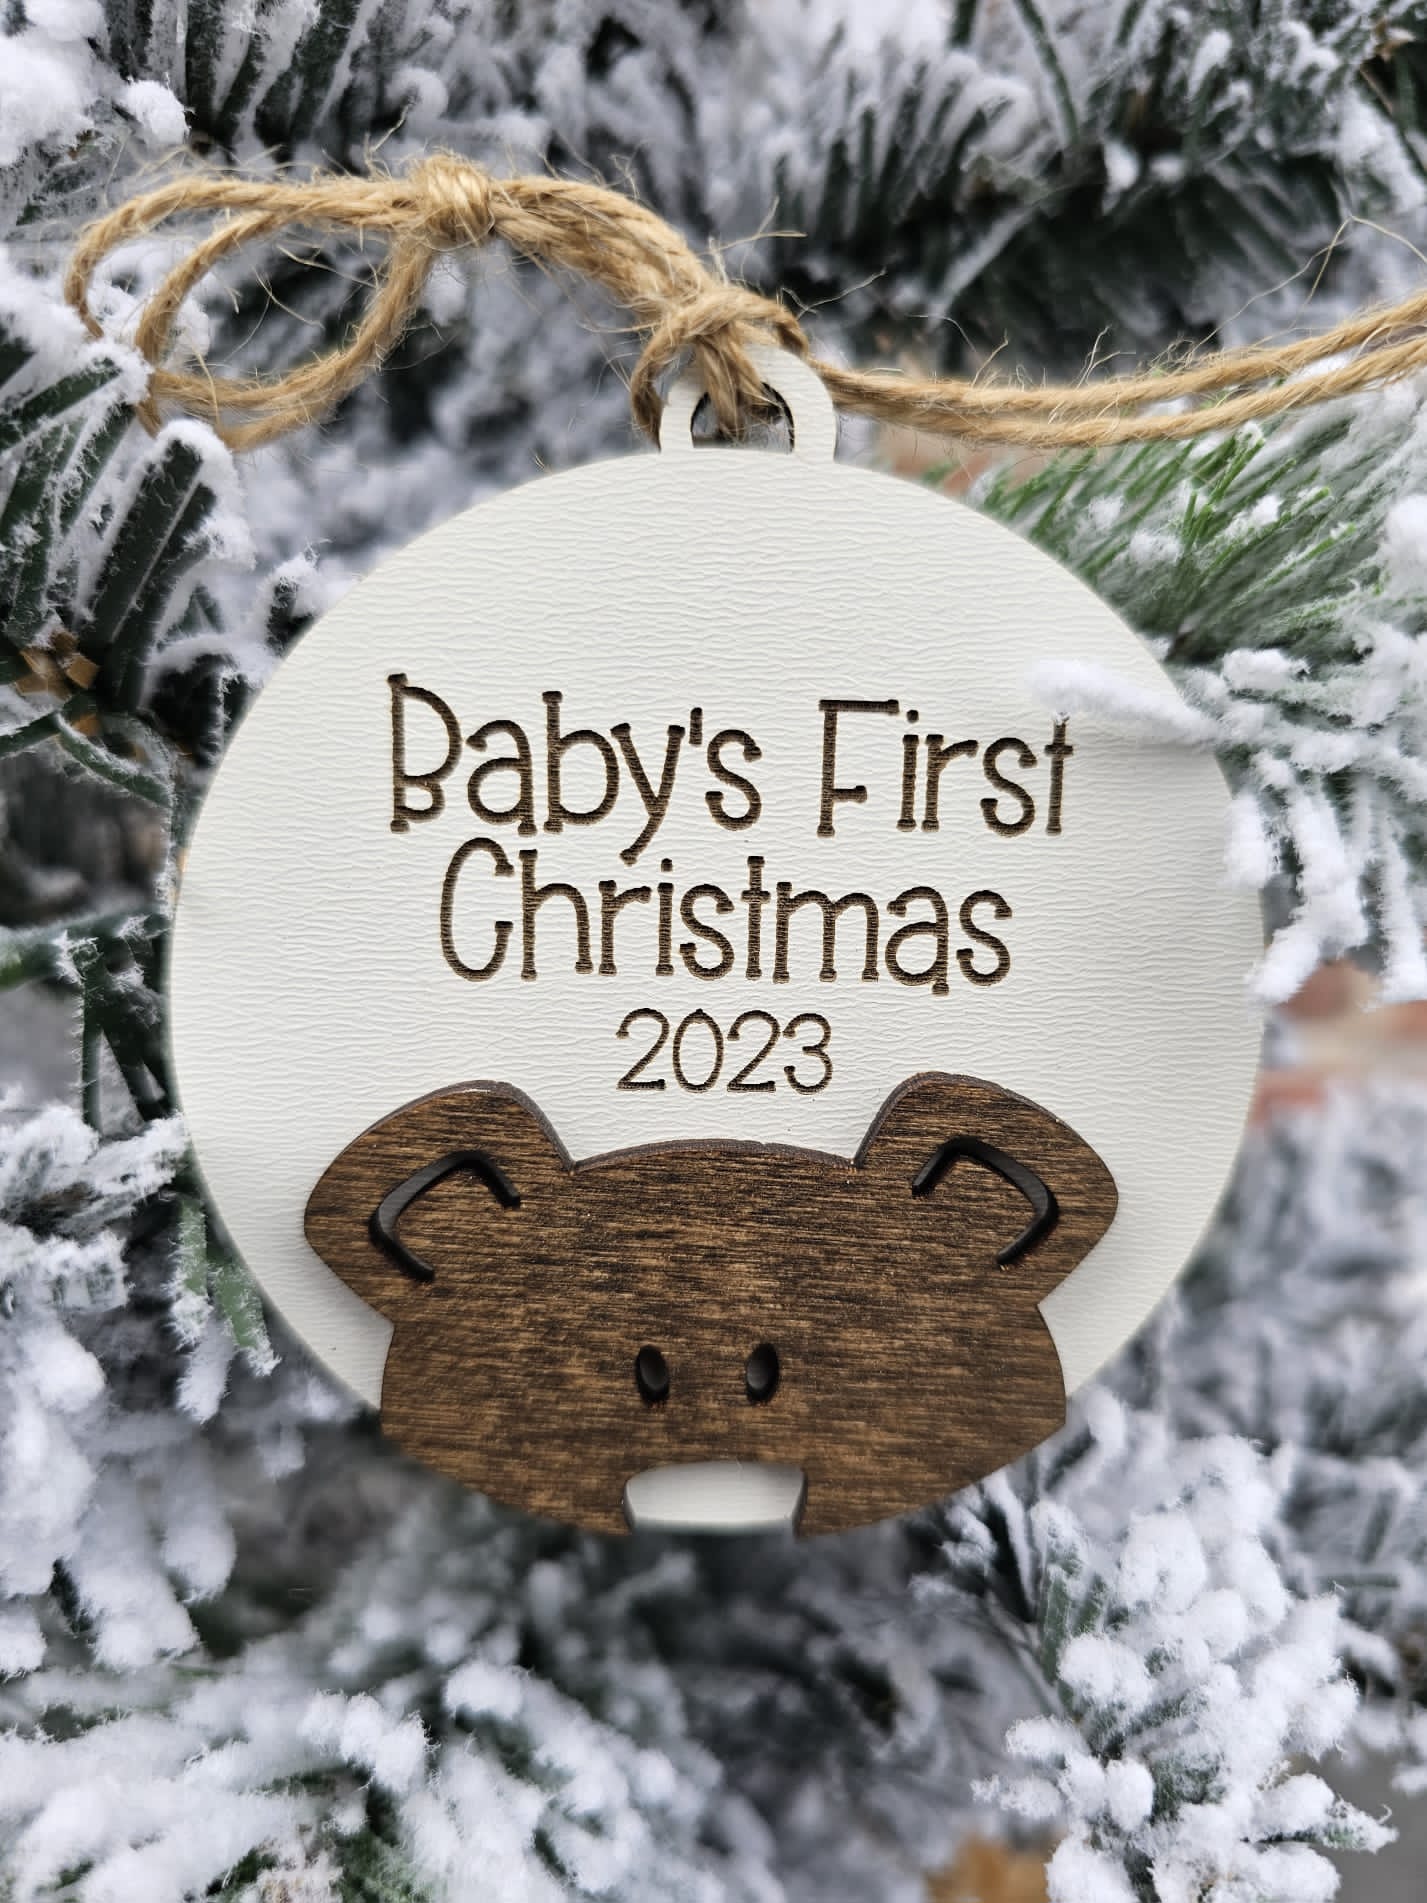 Bear baby's first christmas ornament